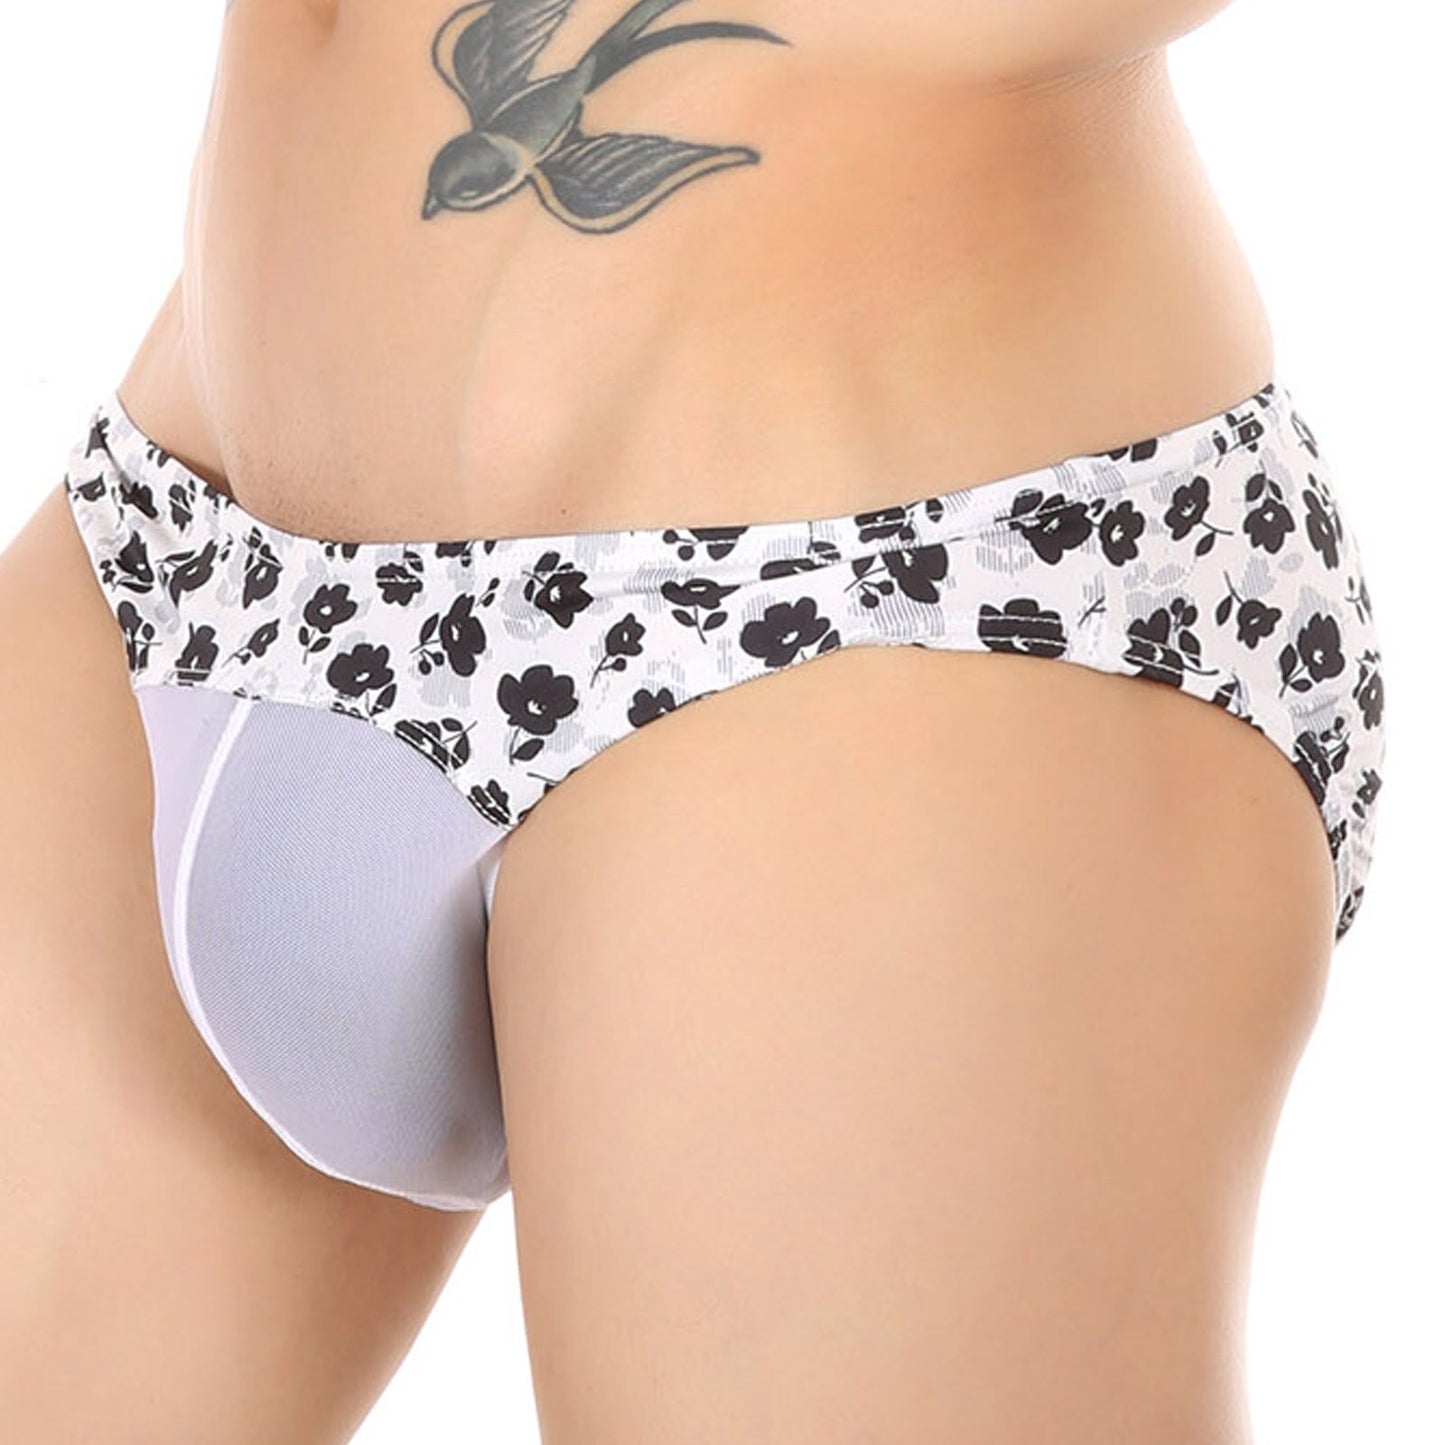 Cute Floral Feminizing Pouch Panties